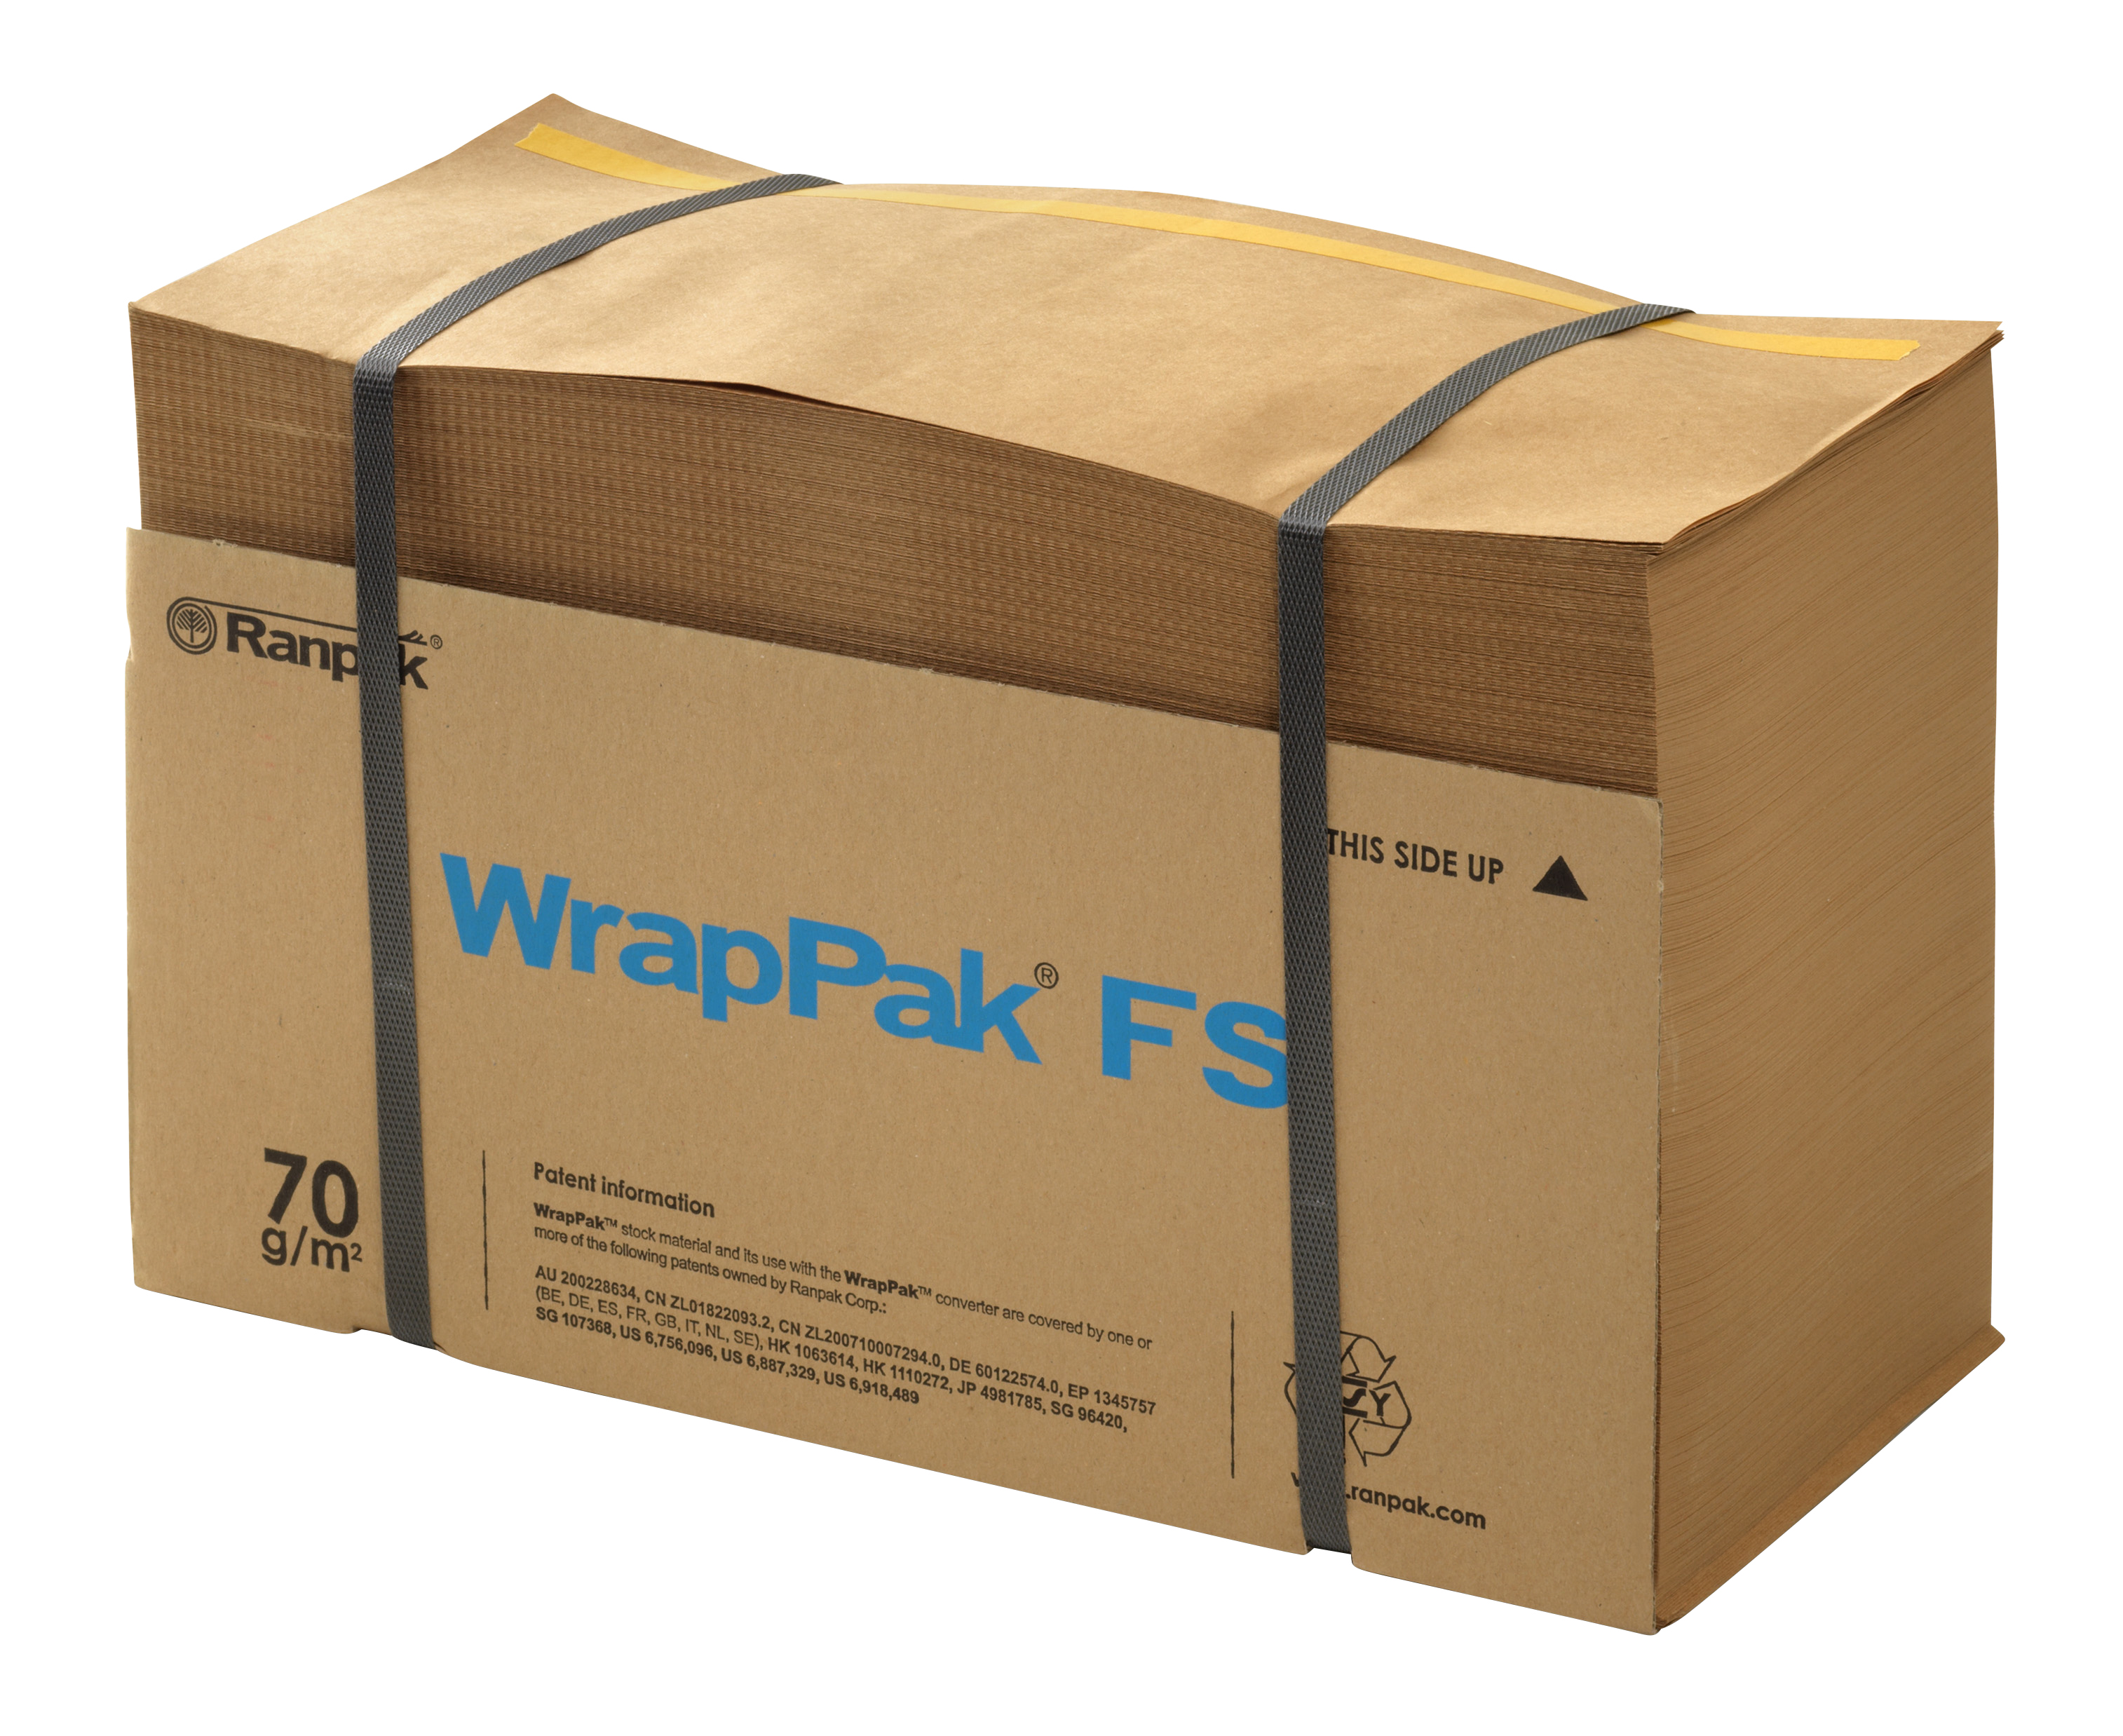 WrapPak WrapPak Cold Chain Protector remplissage et calage detail 5